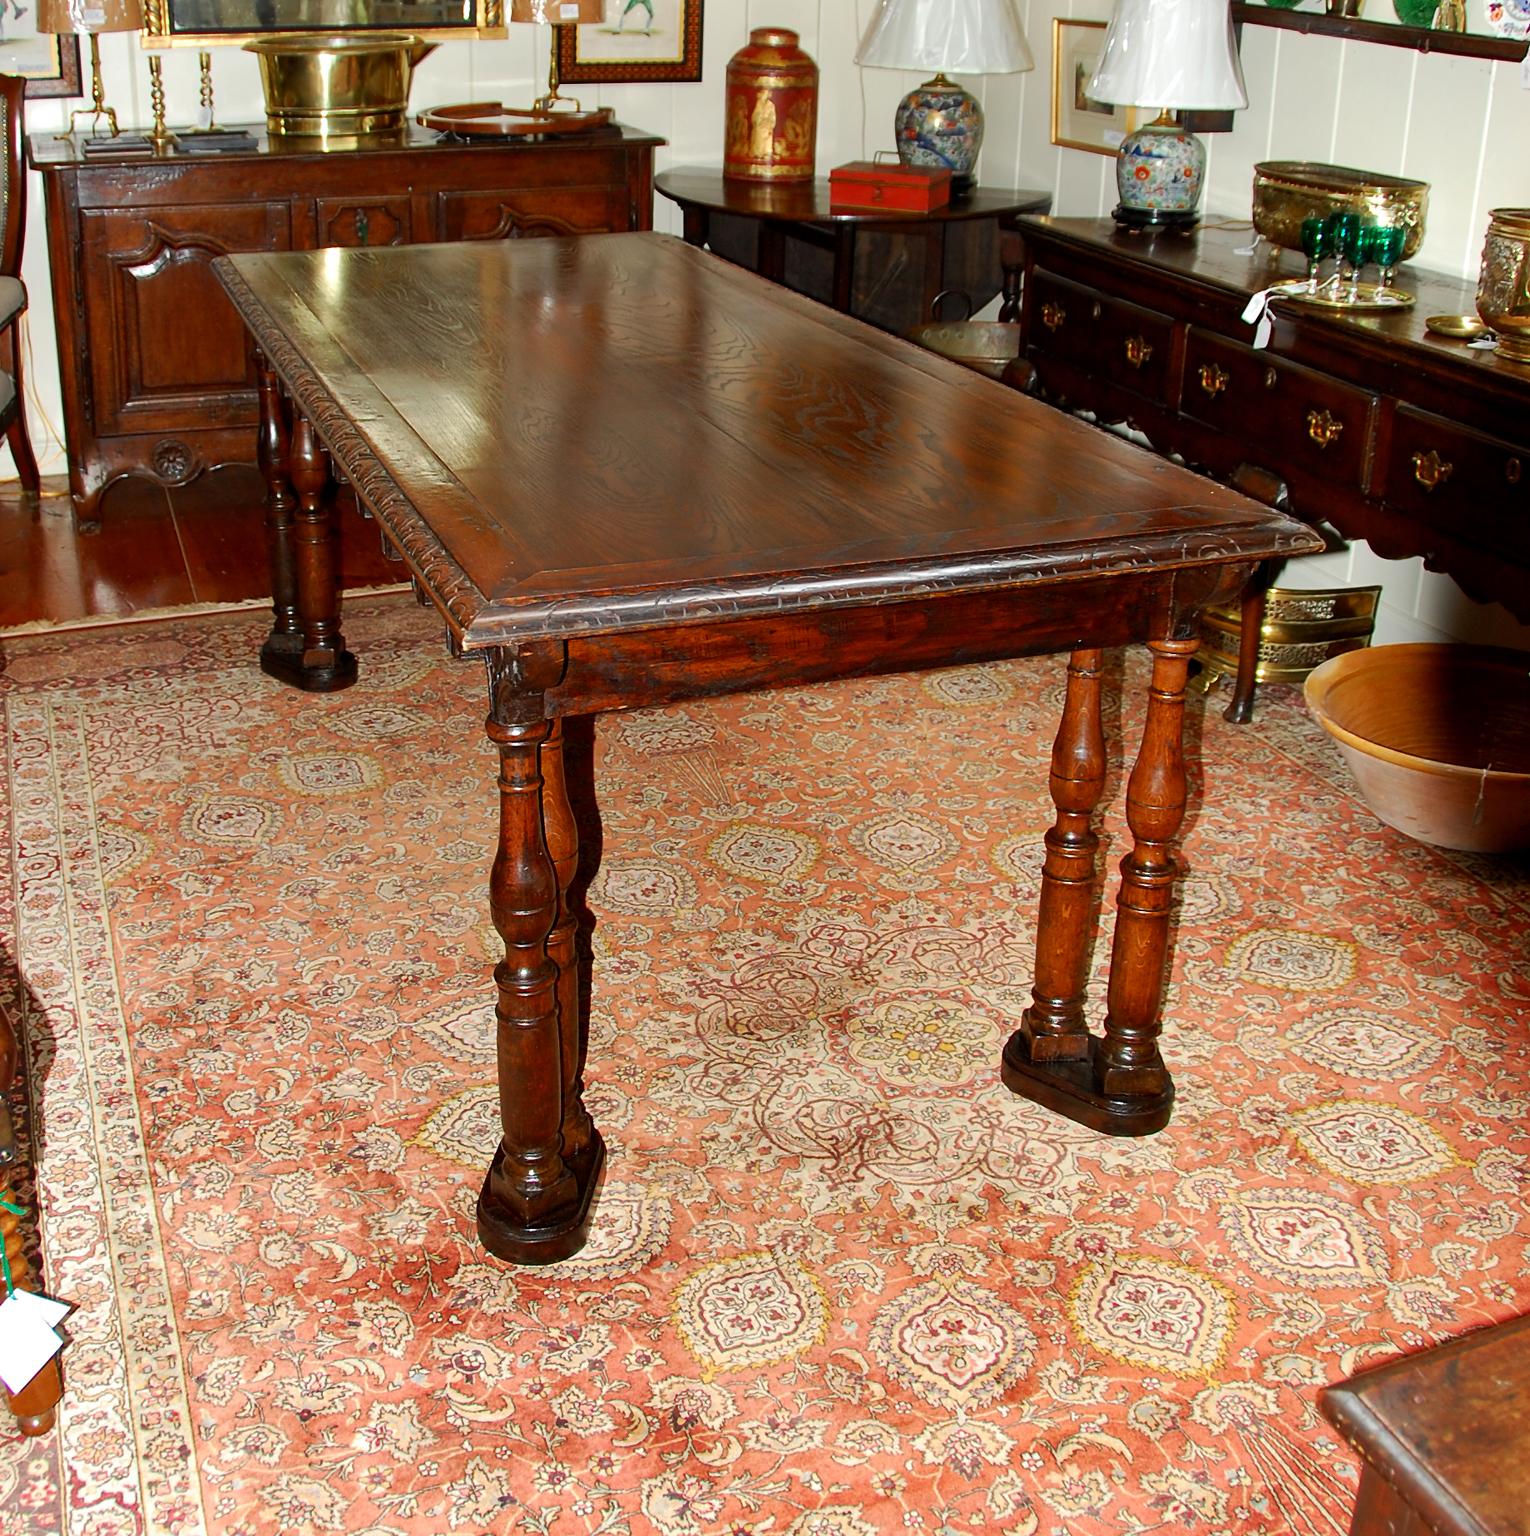 17th century dining table